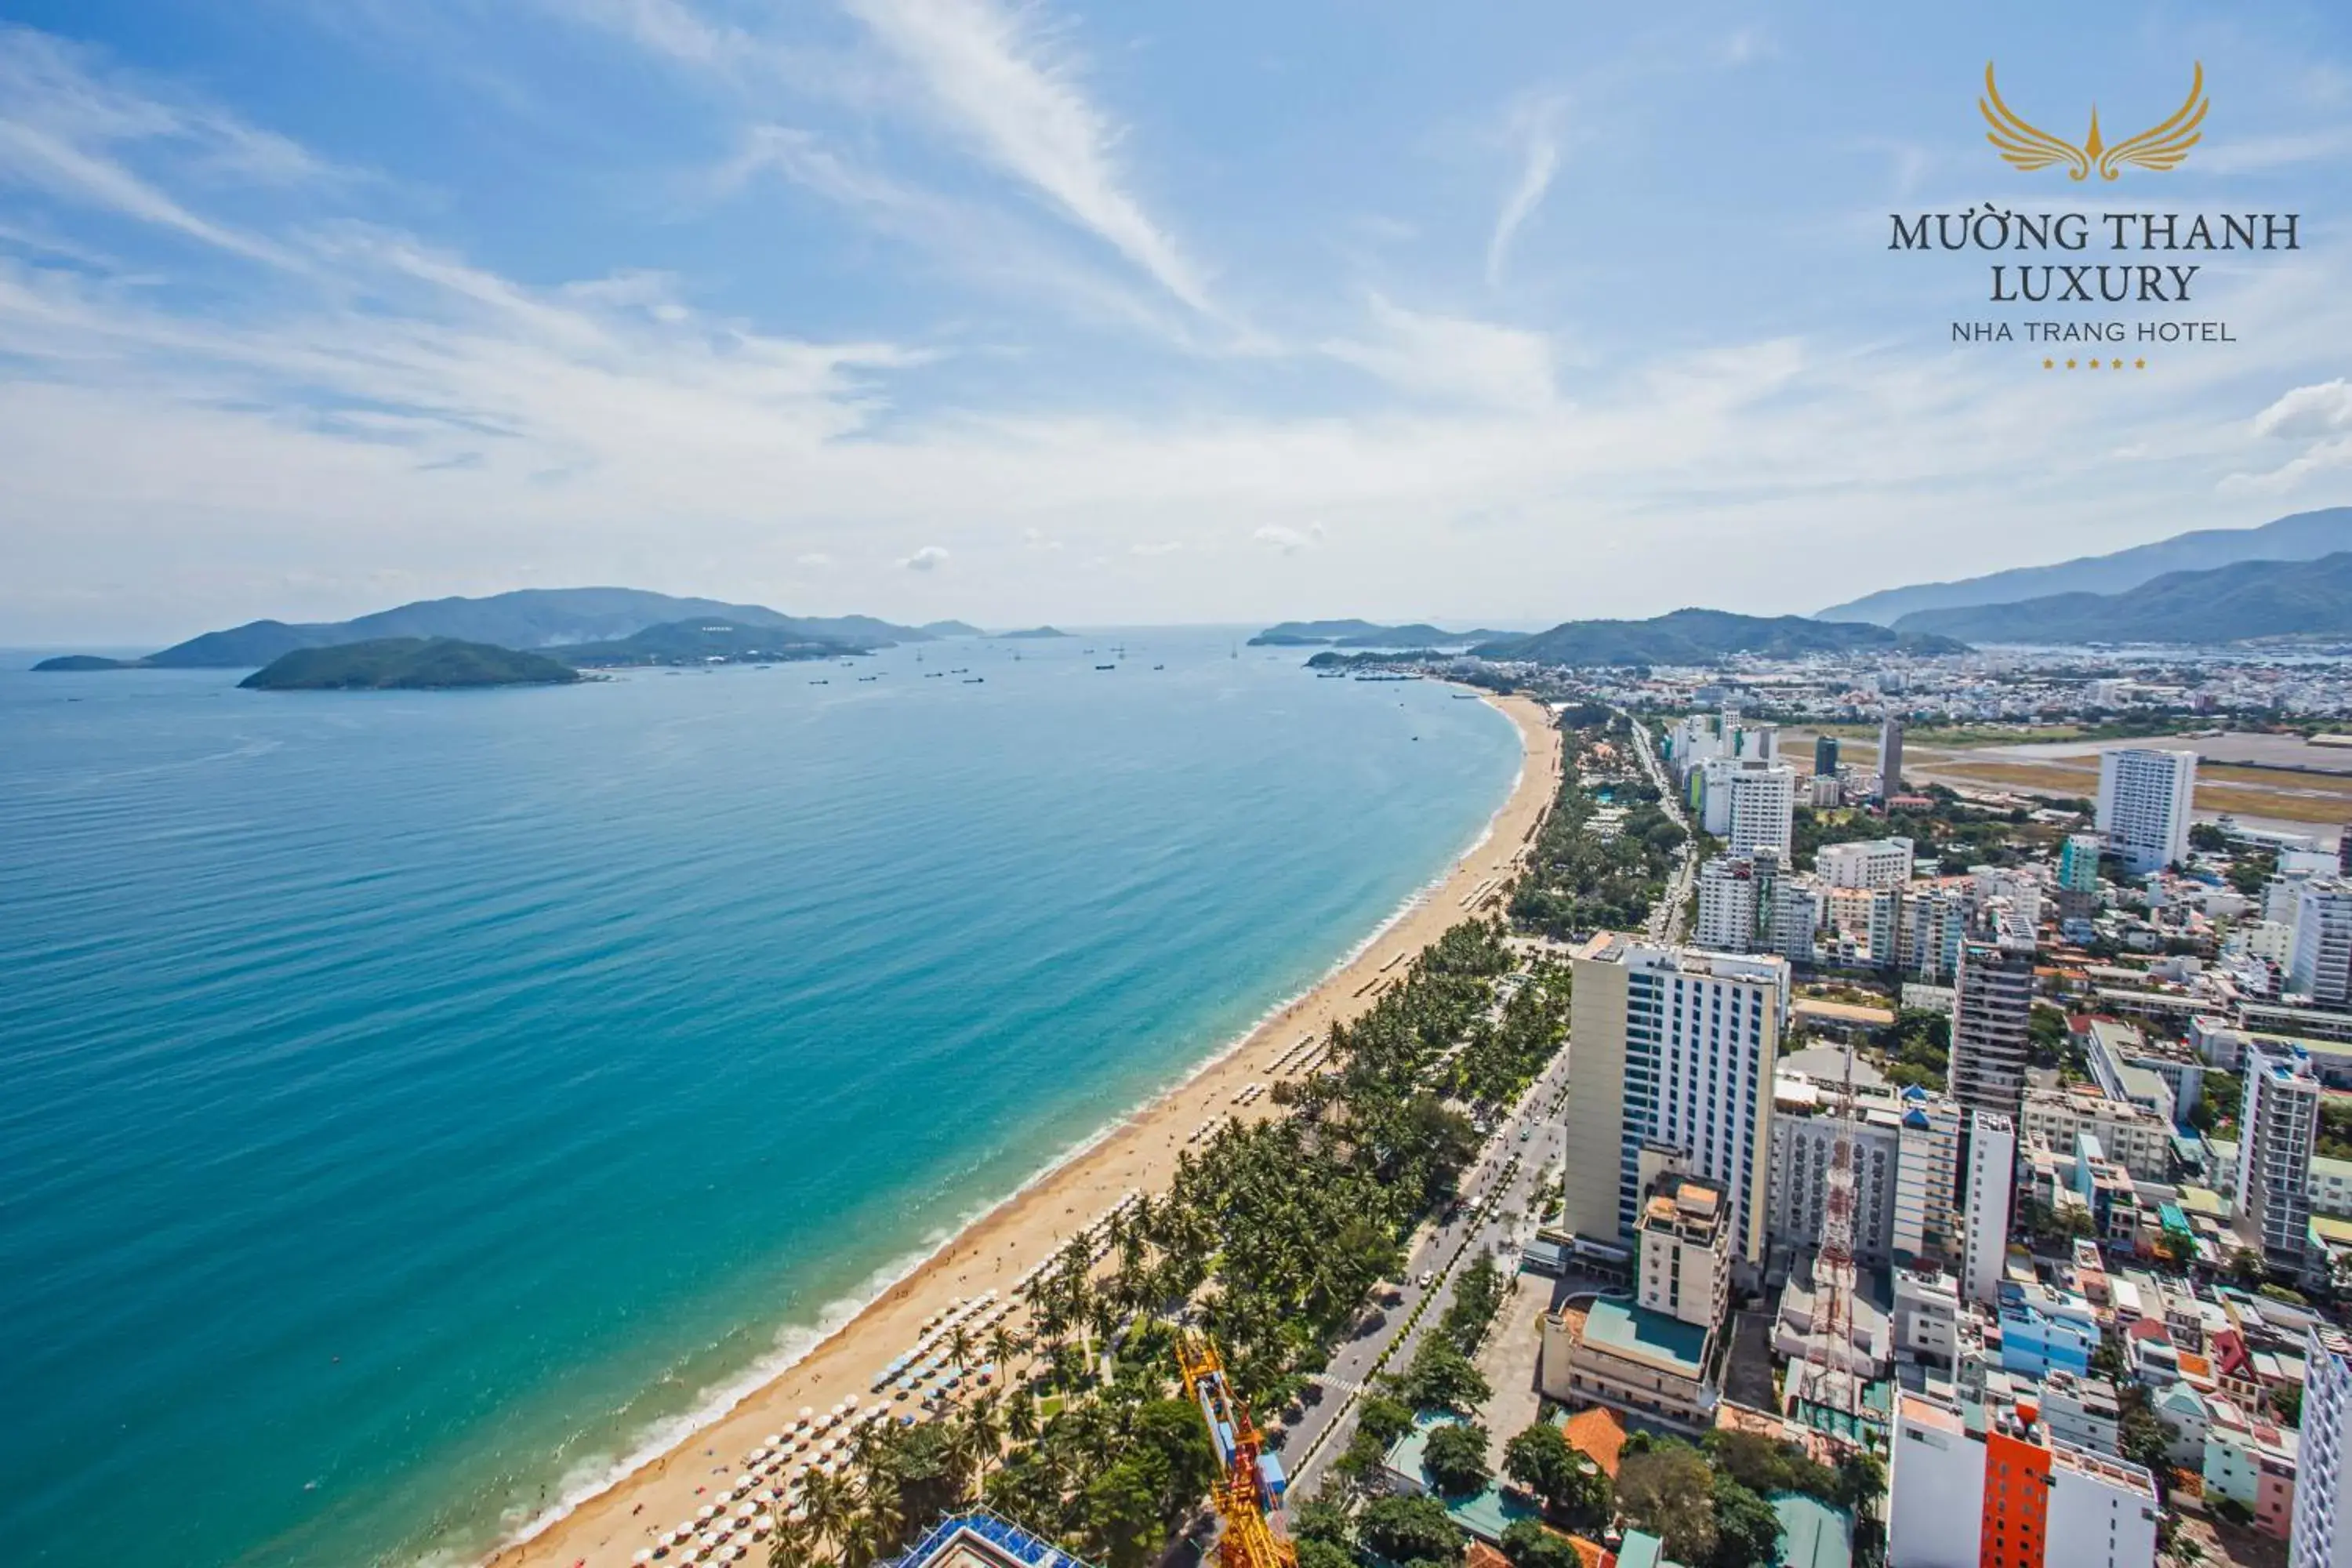 City view, Bird's-eye View in Muong Thanh Luxury Nha Trang Hotel